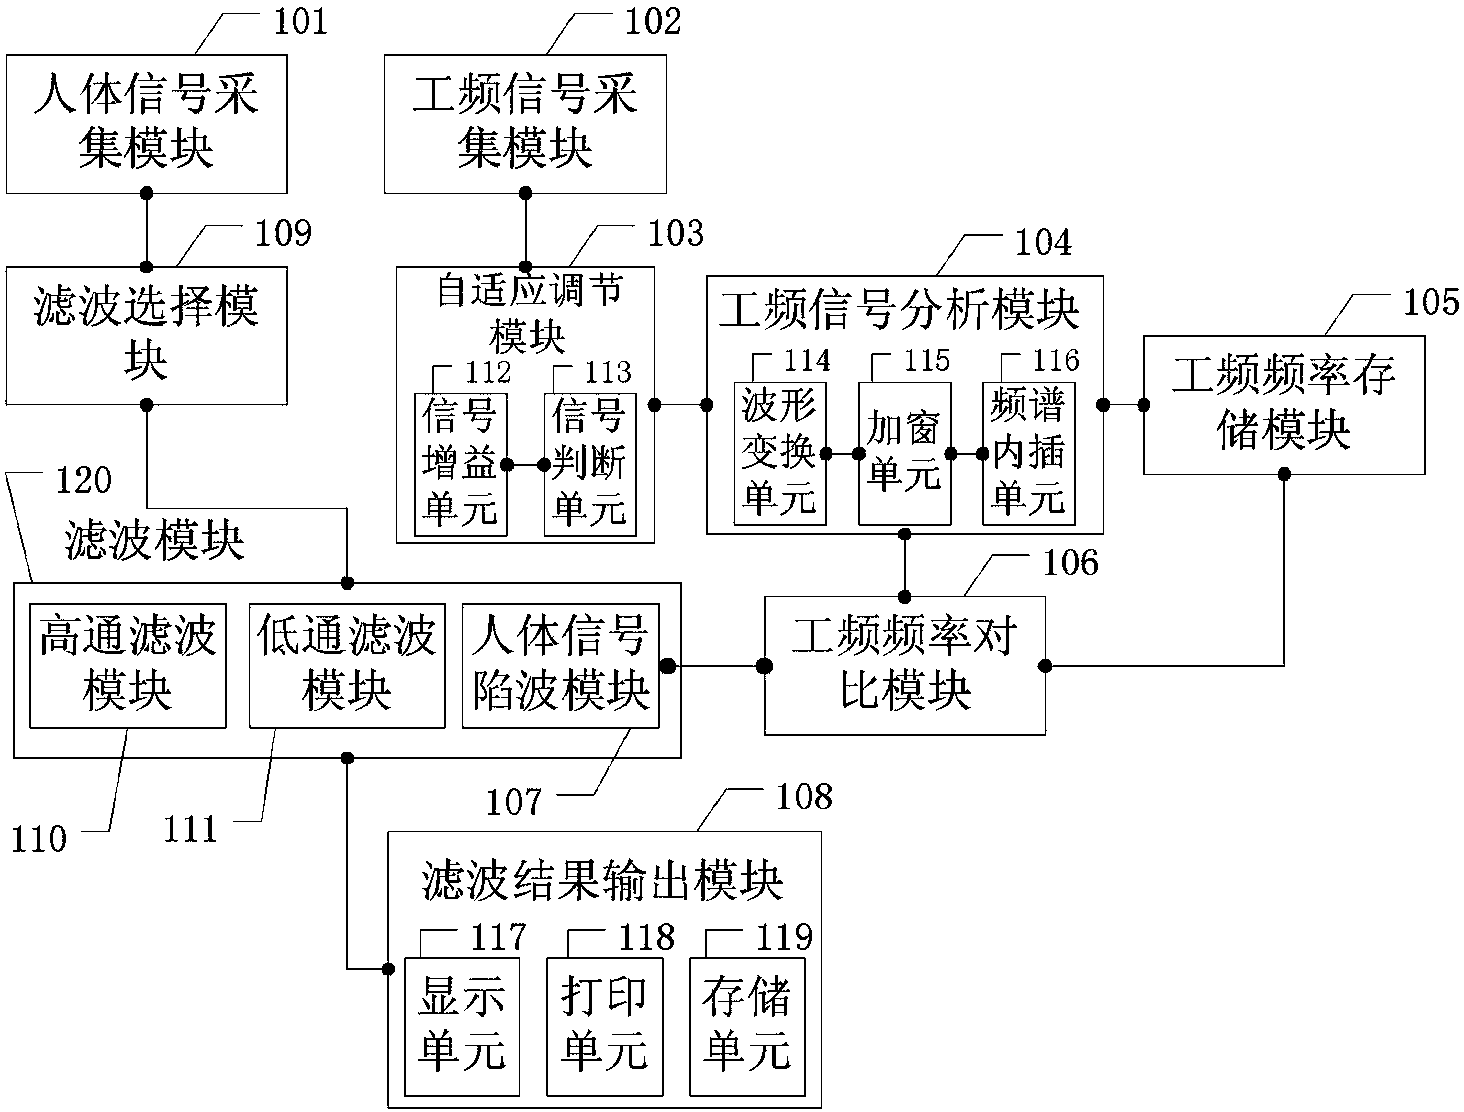 Power frequency digital notch device and method based on frequency track